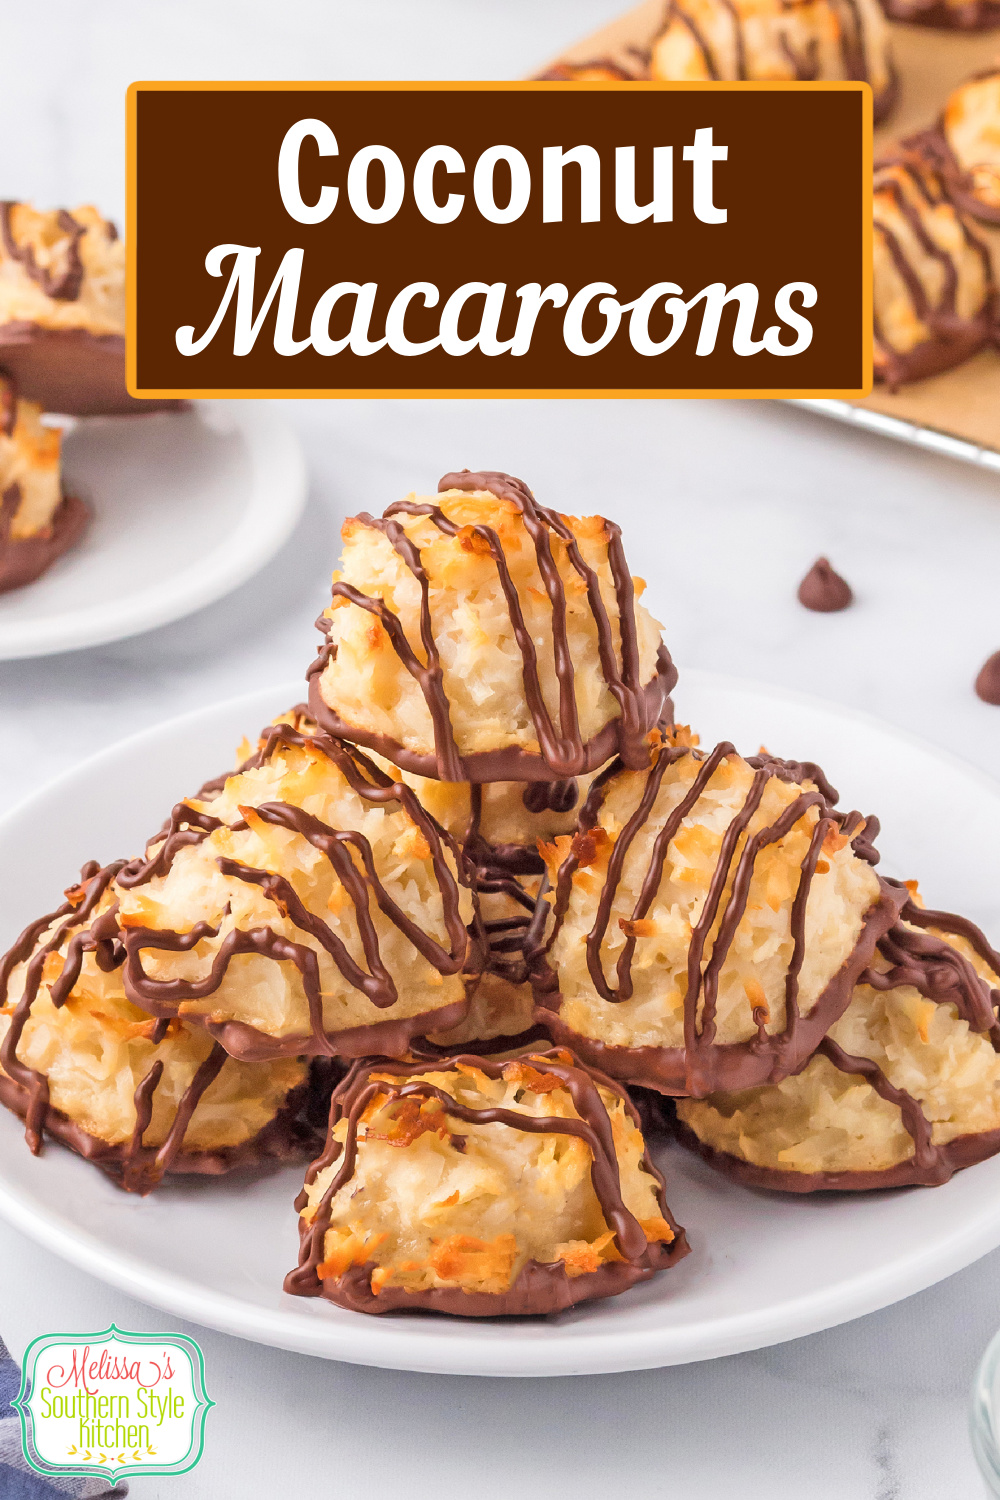 Chocolate dipped Coconut Macaroons are soft, chewy and delicious in every bite. #coconutcookies #macaroons #macarooncookies #cookierecipes #chocolate #easymacaroonrecipe